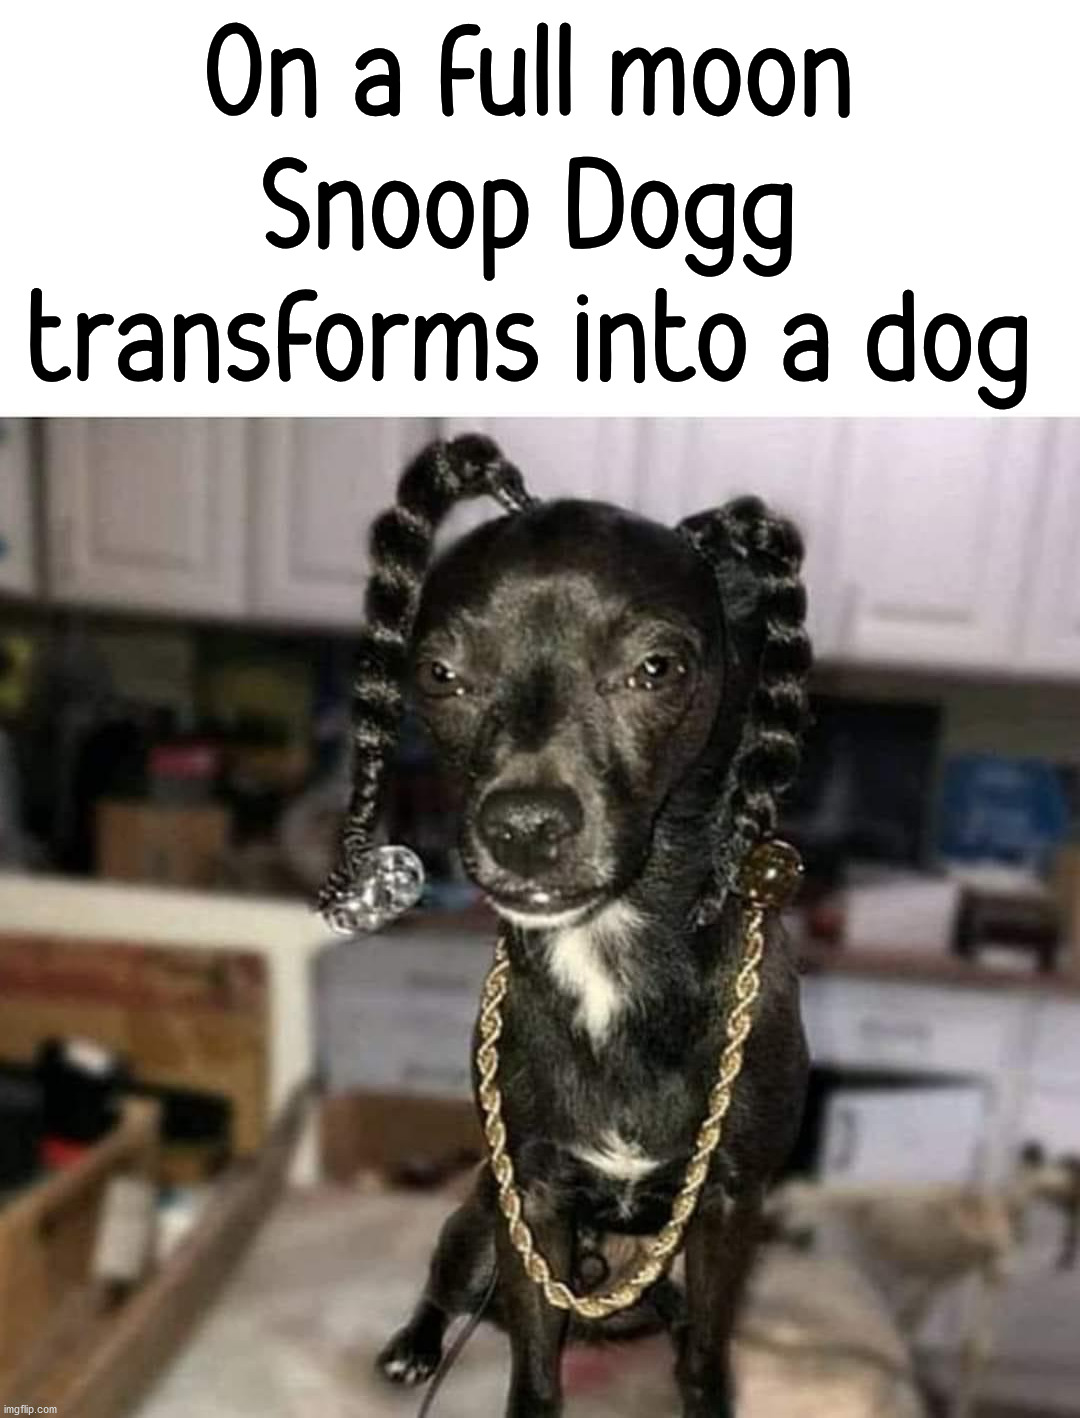 On a full moon Snoop Dogg transforms into a dog | image tagged in snoop dogg,transformation | made w/ Imgflip meme maker